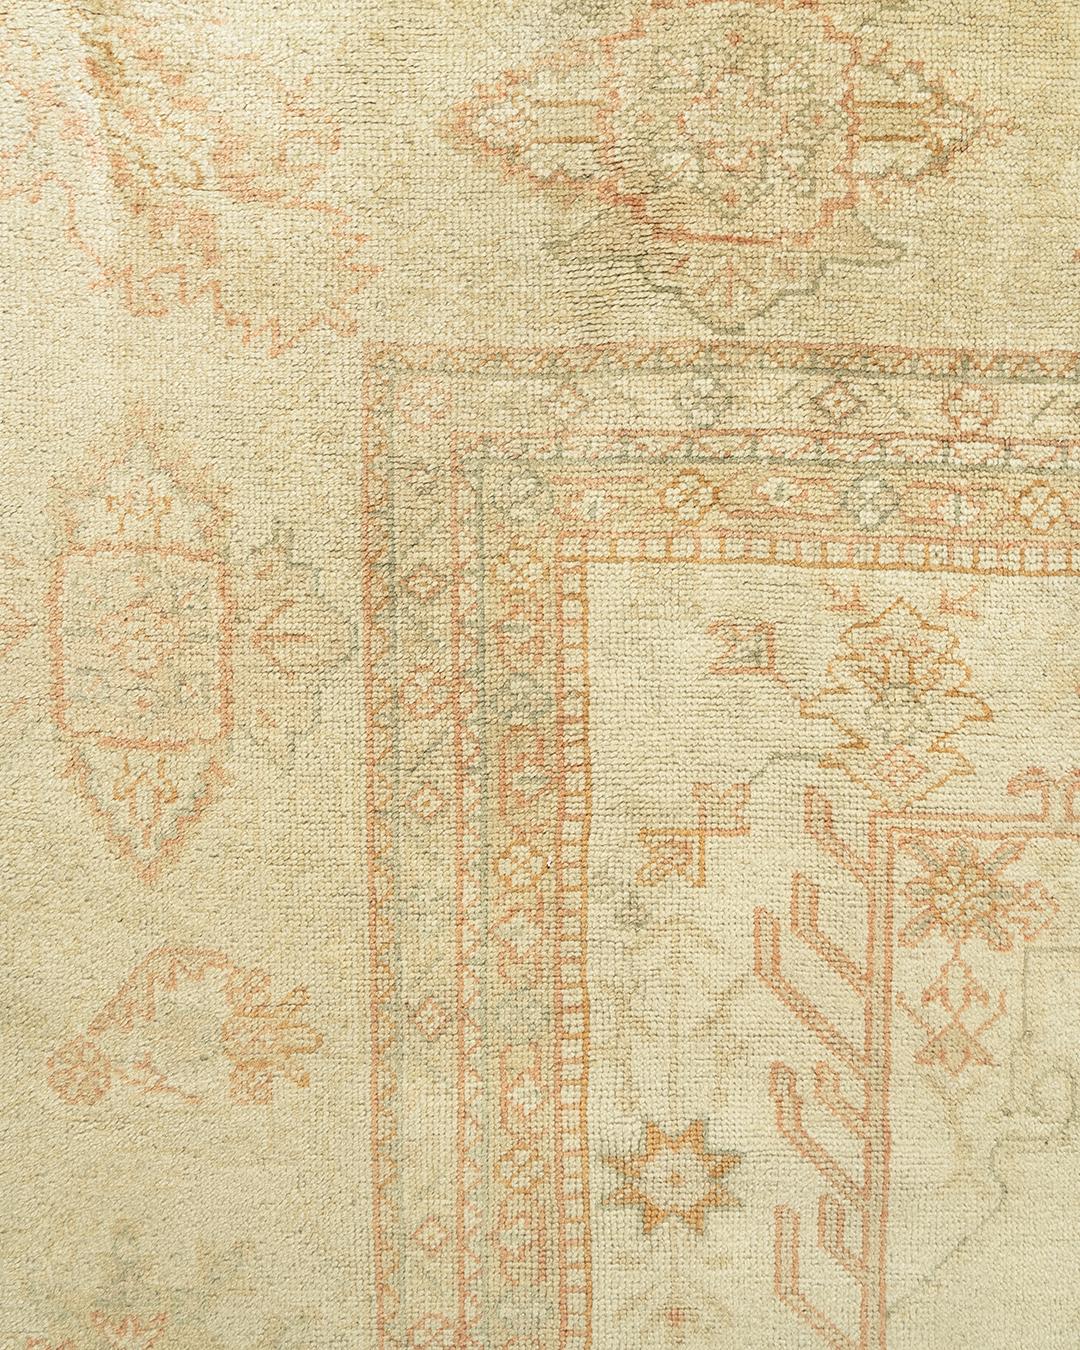 Antique Turkish Oushak rug, circa 1900. Measures: 12'3 x 15'10. The plain soft field with delicate floral and vine designs creates a harmonious feel. Oushak's are known for their soft palettes combined with eccentric drawing. Oushak in western